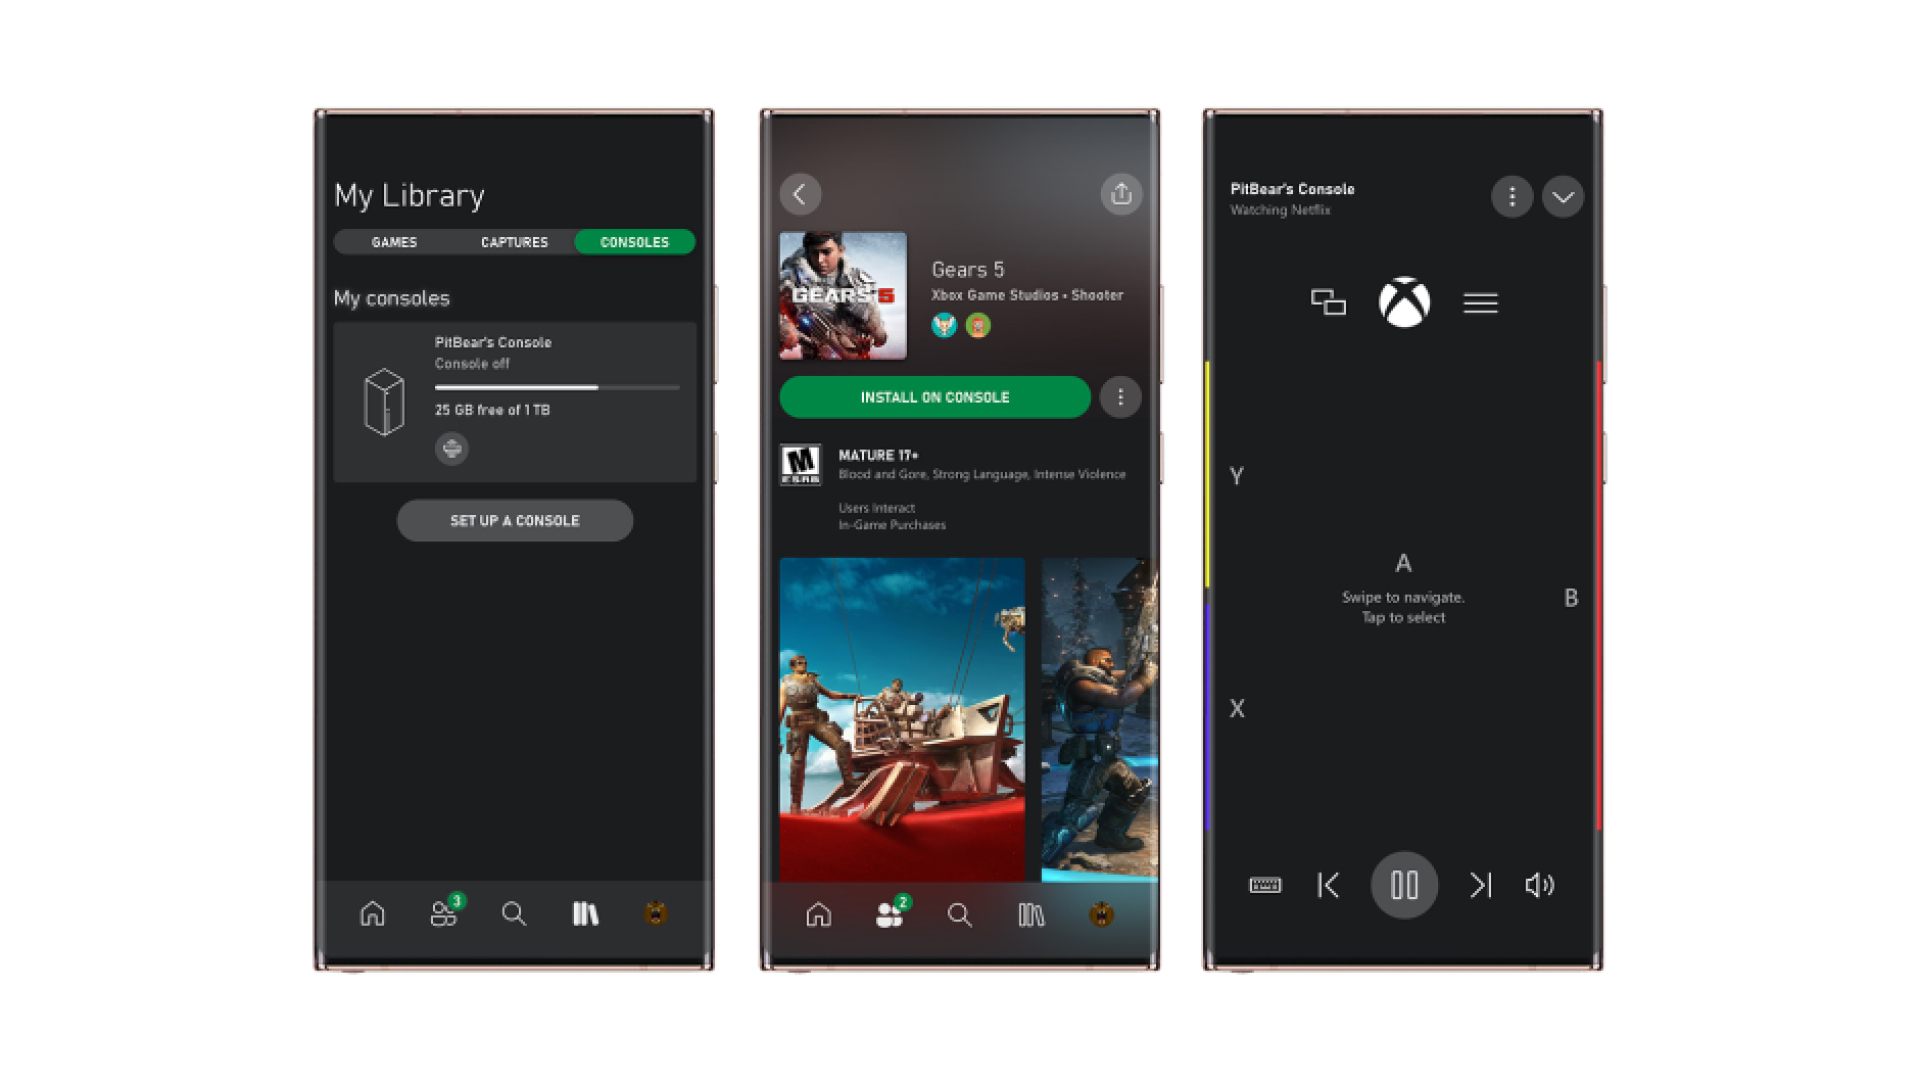 New Xbox App (Beta) on Mobile now available on Android Xbox-Mobile-App_Remote-game-management.jpg